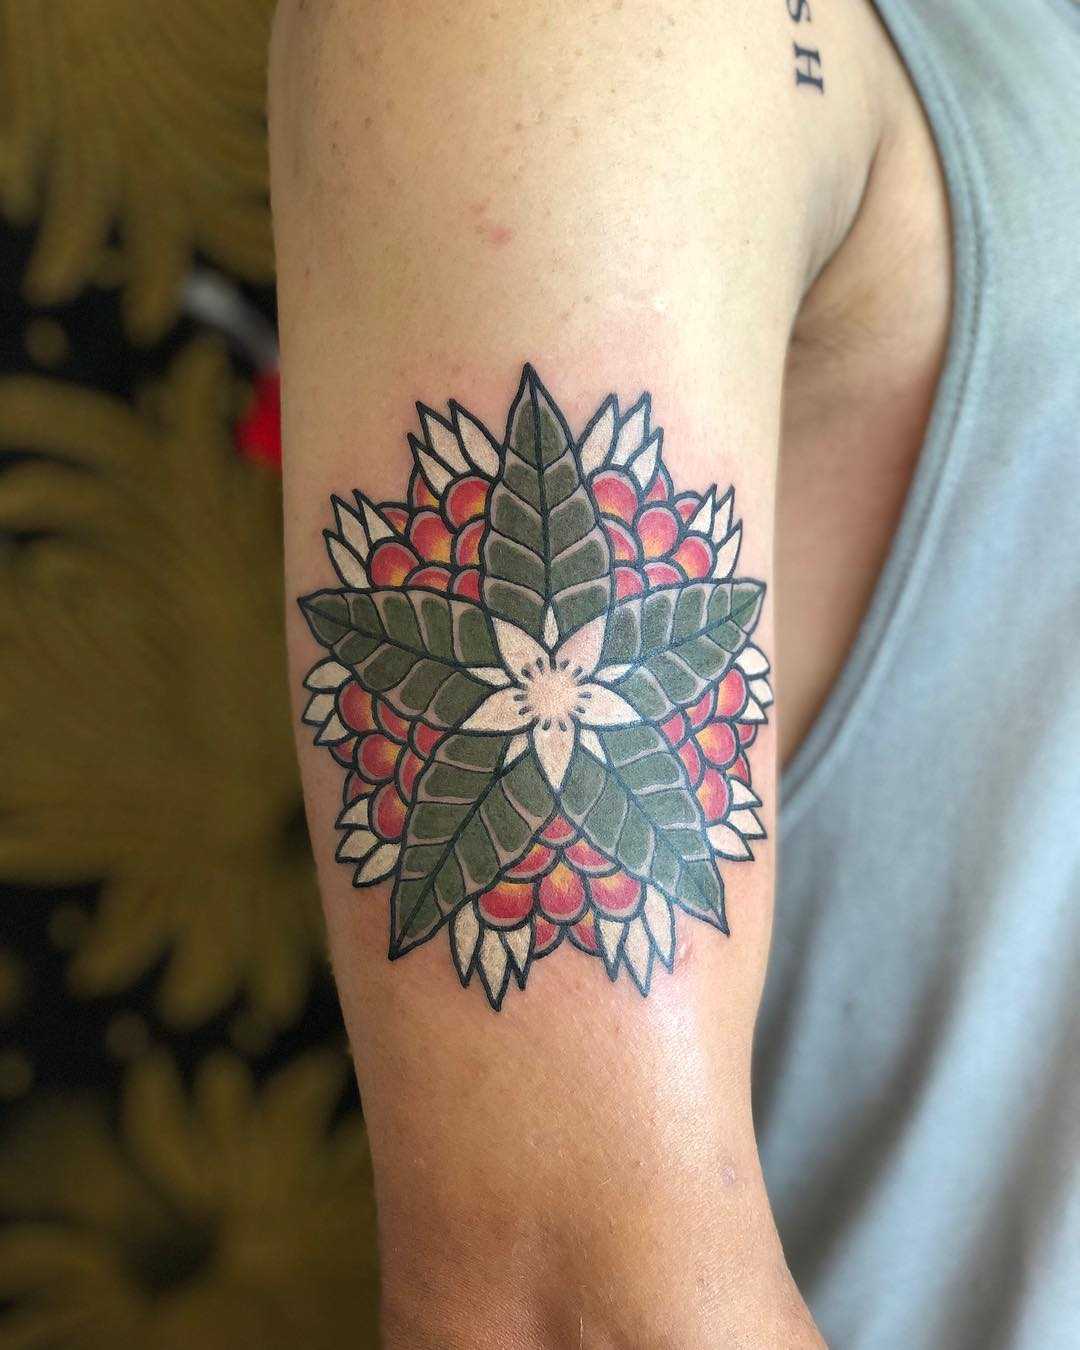 Green and red flower by tattooist Jayaism